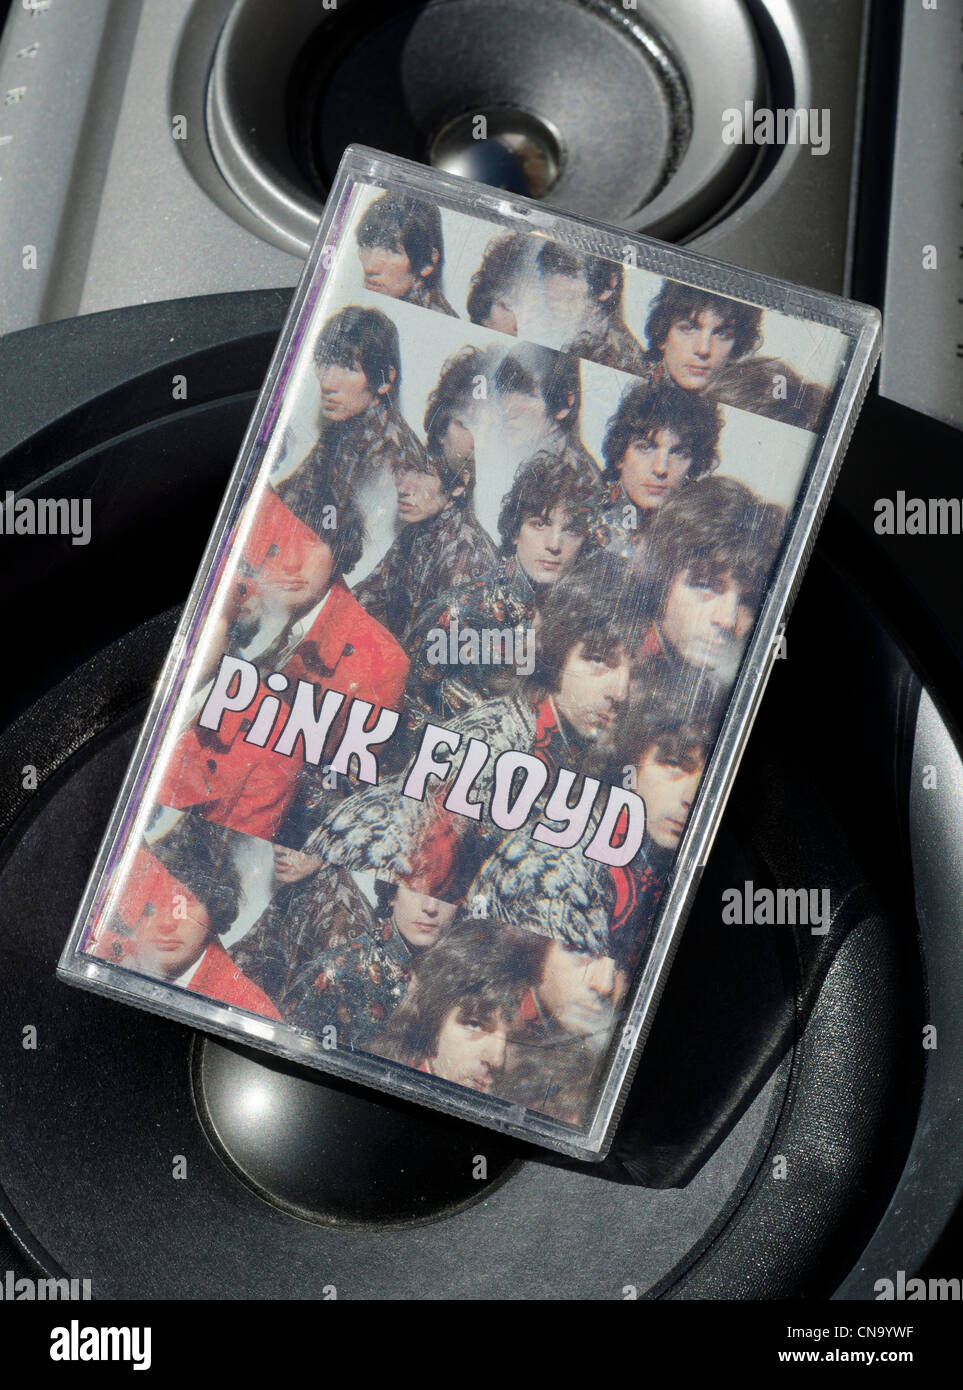 The Piper at the Gates of Dawn, Pink Floyd's Debut Album, On Audio  Cassette, Released in August 1967 Stock Photo - Alamy